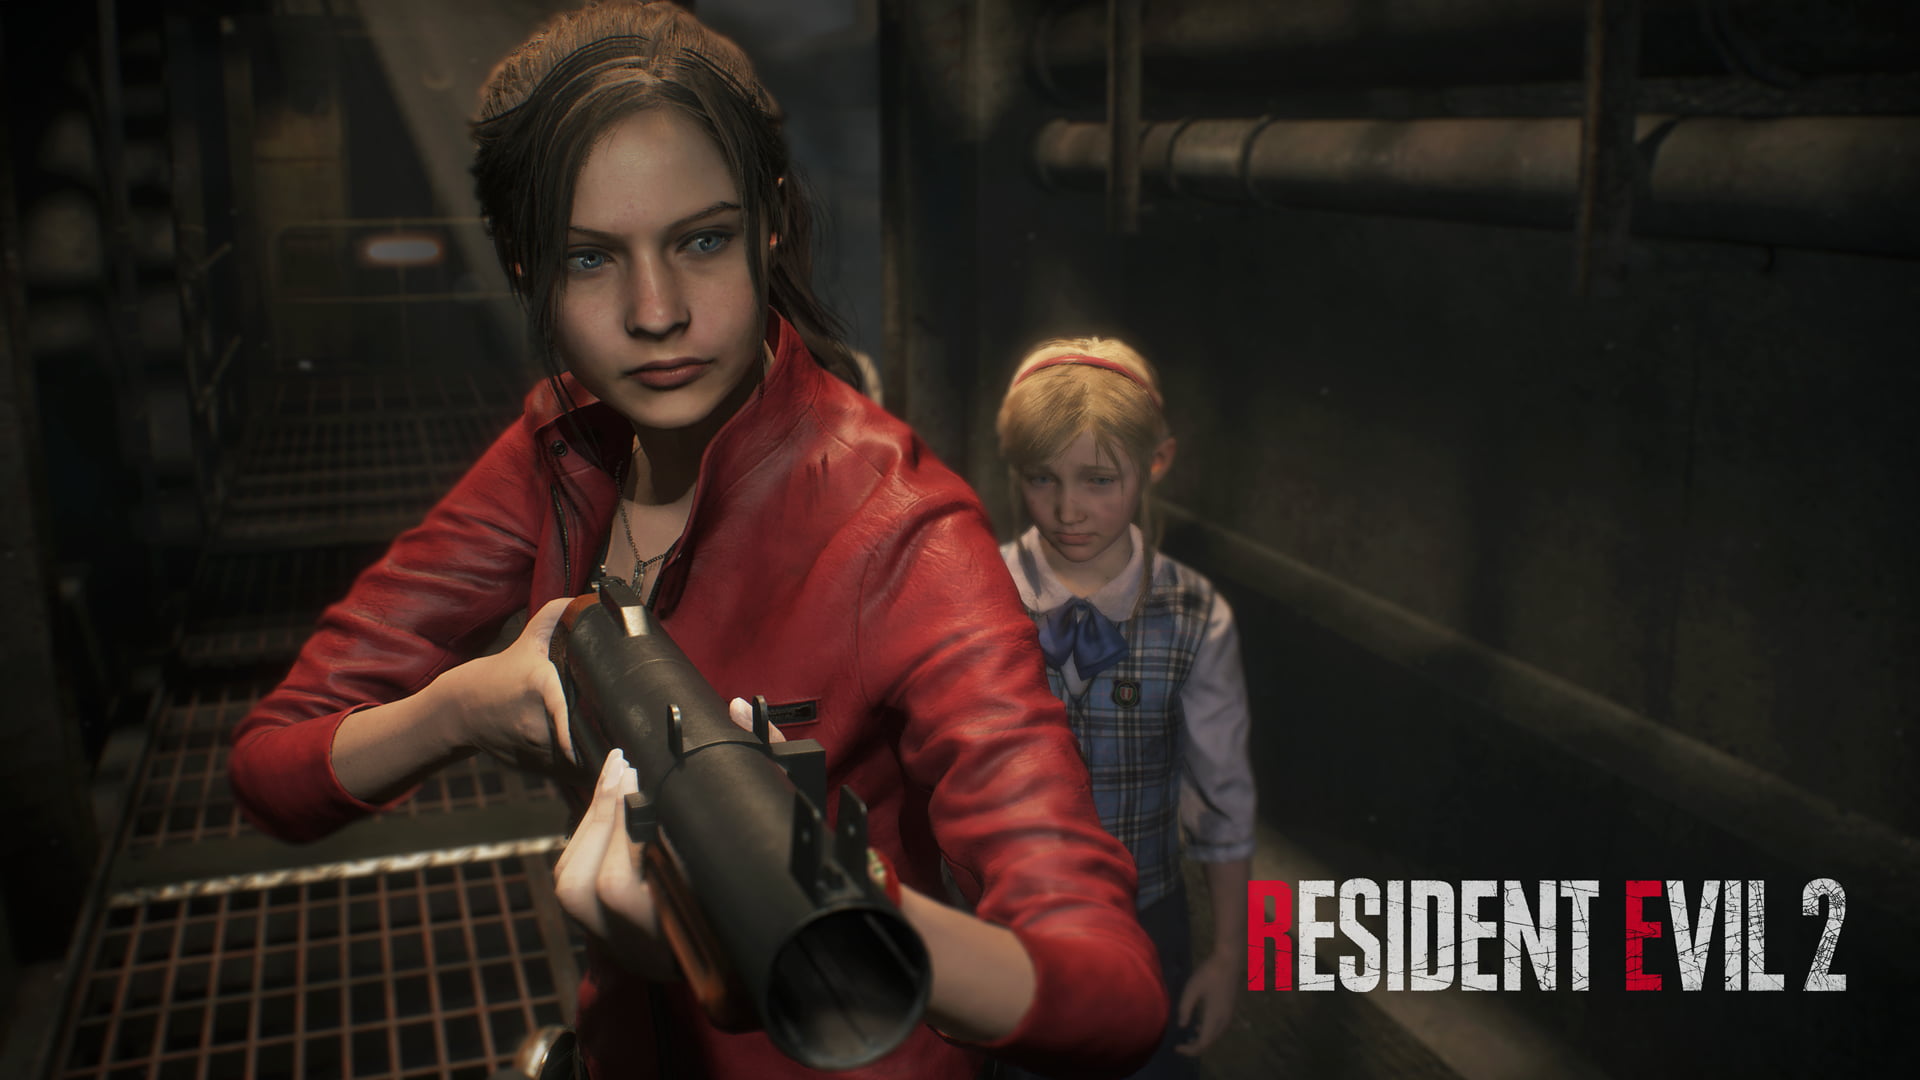 Resident Evil 2, video games, games art, Claire Redfield, Sherry Birkin